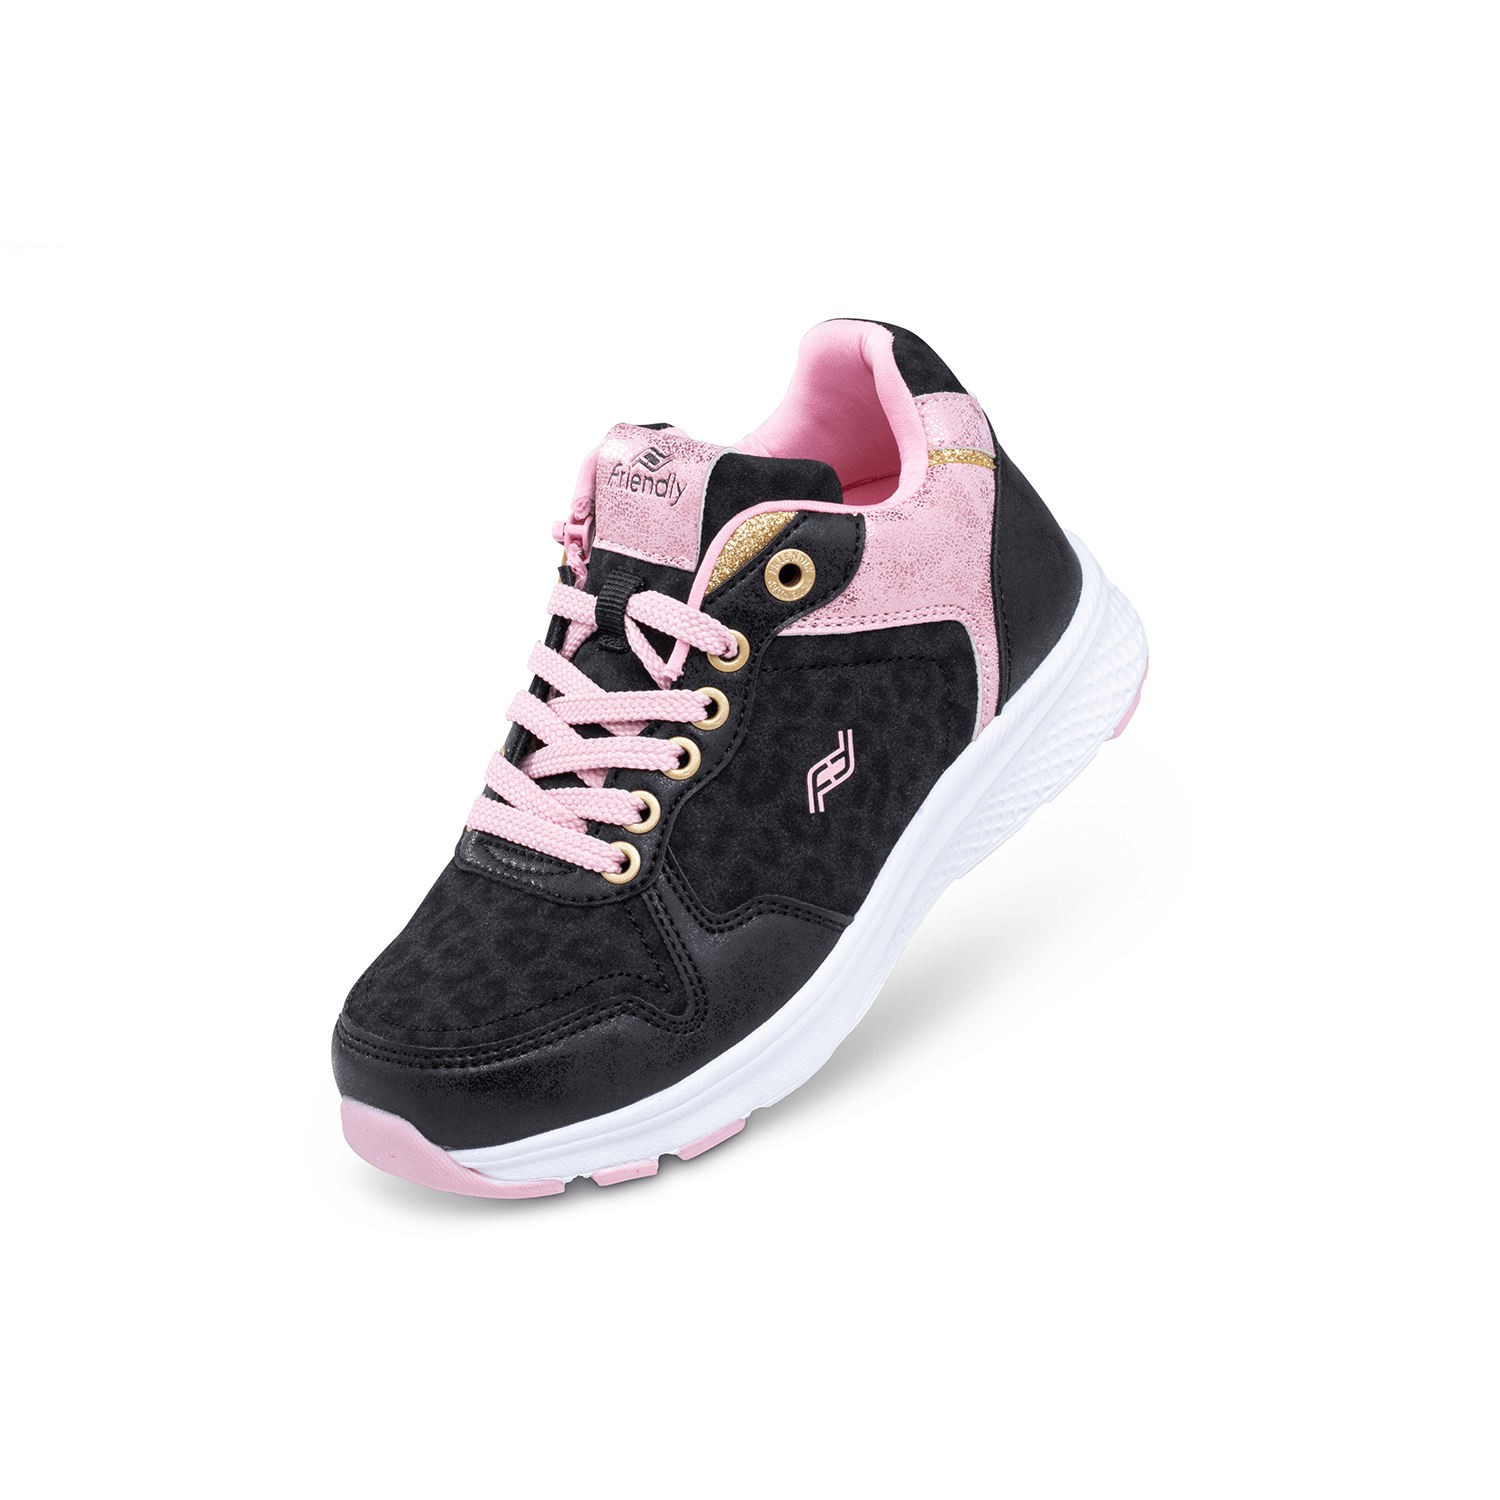 Excursion Black Leopard & Dahlia Pink - Friendly Shoes - The Shoe for All Abilities